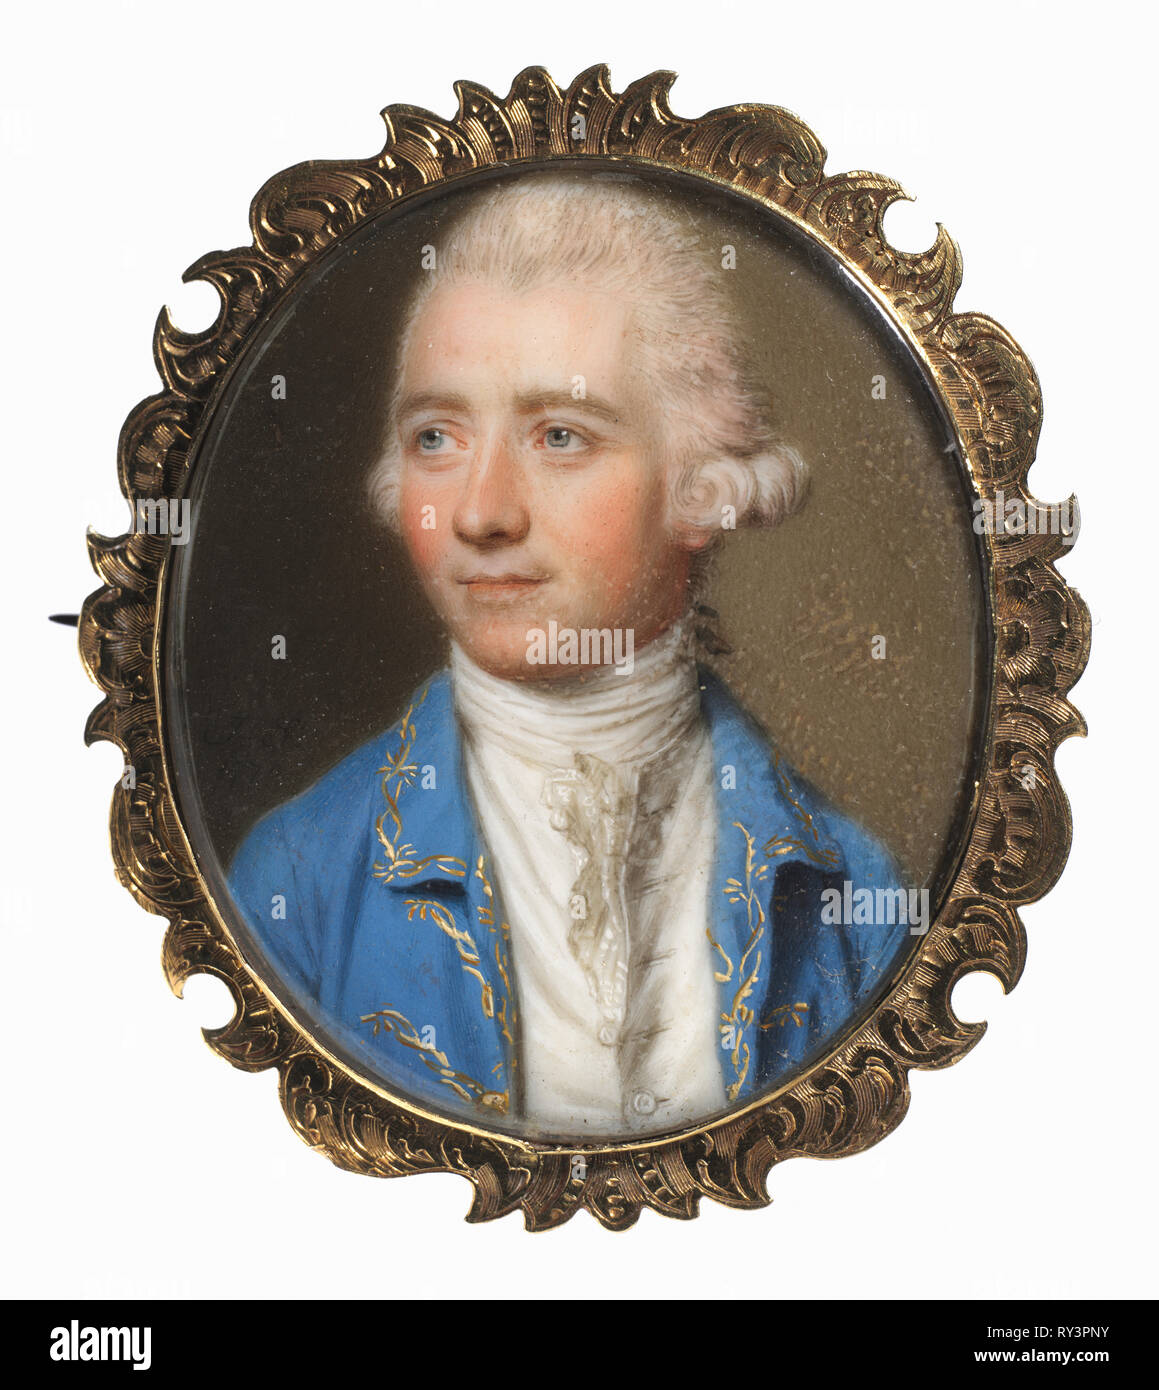 Portrait of a Man, Possibly Sir Soulden Lawrence, 1770. John I Smart (British, 1741-1811). Watercolor on ivory in an amalgam frame; framed: 4.4 x 3.8 cm (1 3/4 x 1 1/2 in.); unframed: 3.2 x 3.1 cm (1 1/4 x 1 1/4 in Stock Photo